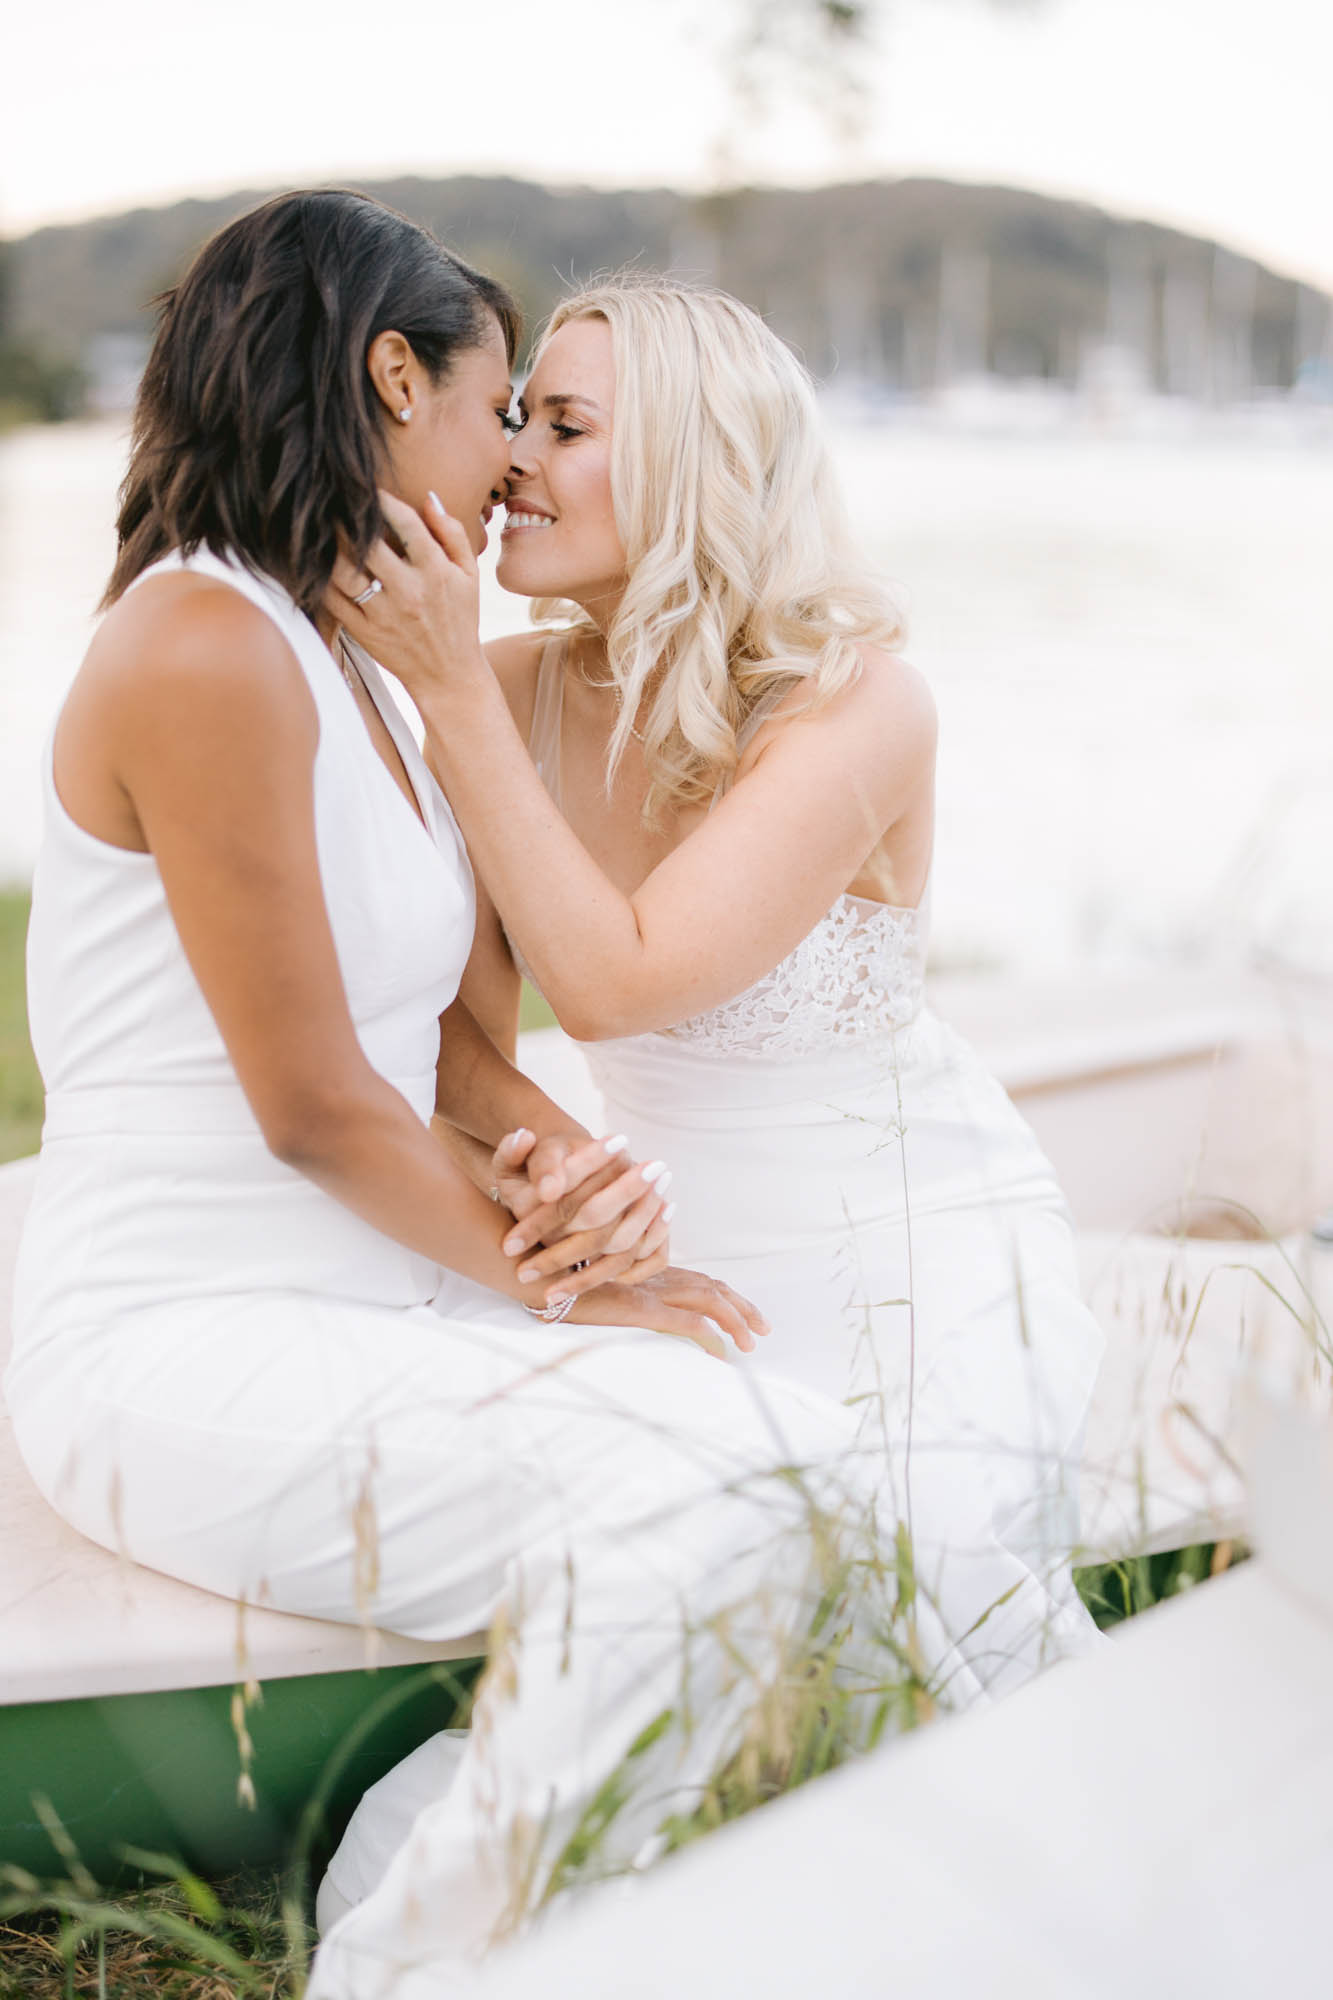 Intimate DIY Australia wedding on the water | Yvonne Law Photography | Featured on Equally Wed, the leading LGBTQ+ wedding magazine